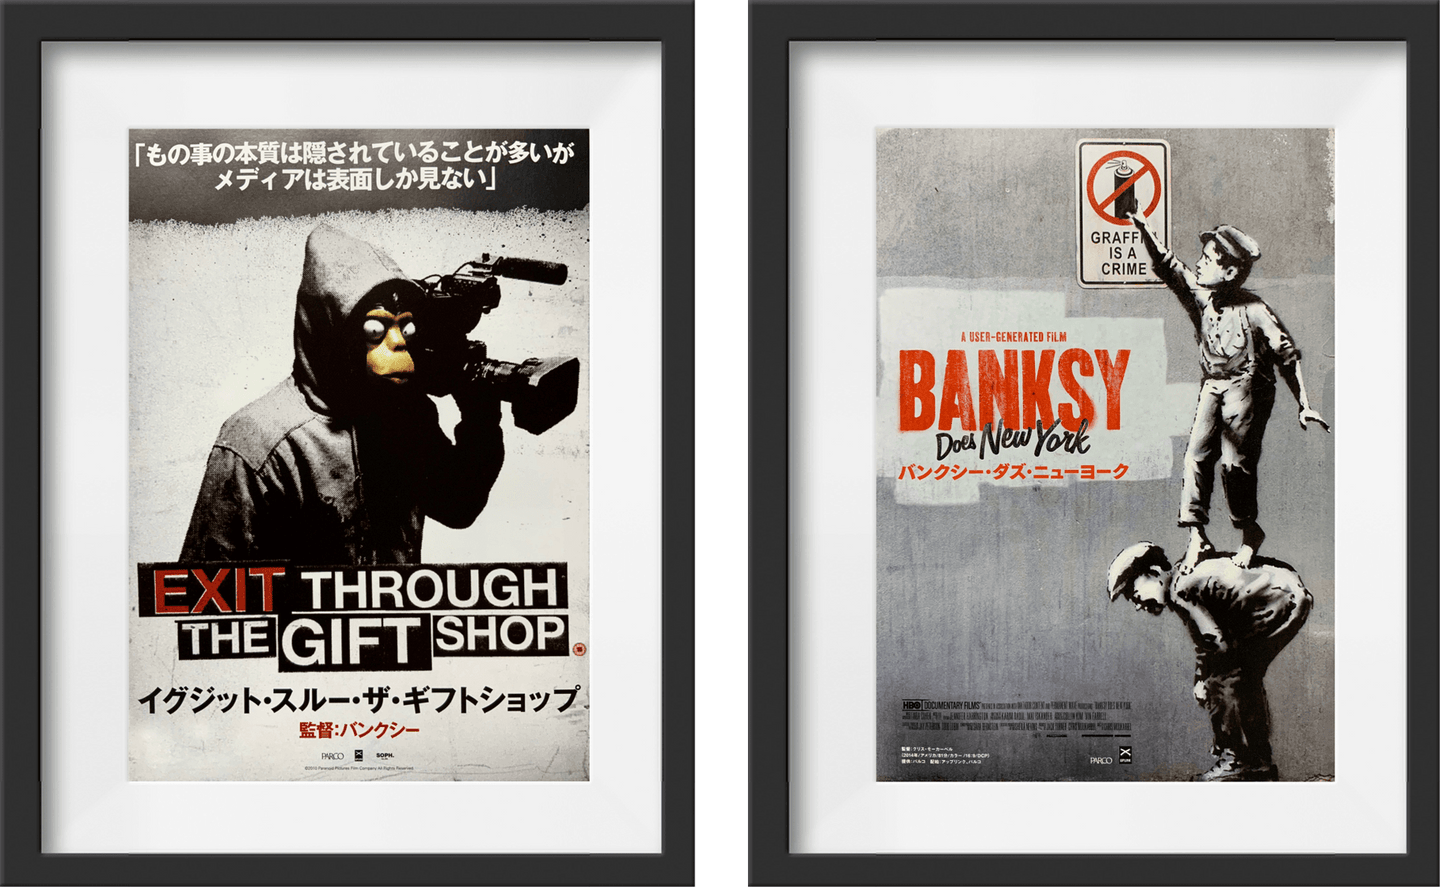 Two Japanese Chirashi's for Banksy films